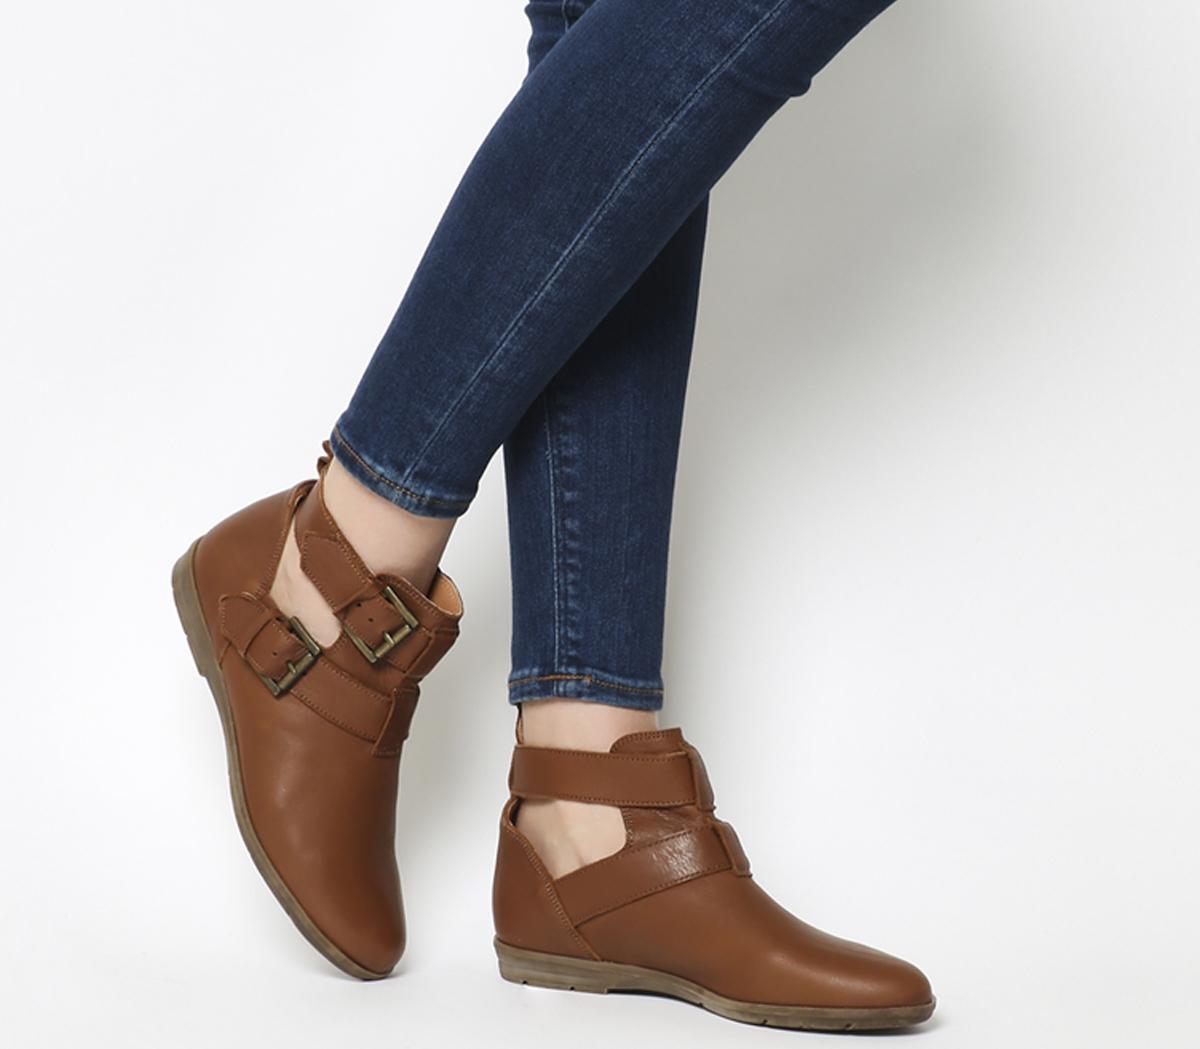 Cut Out boots Tan Leather - Ankle Boots